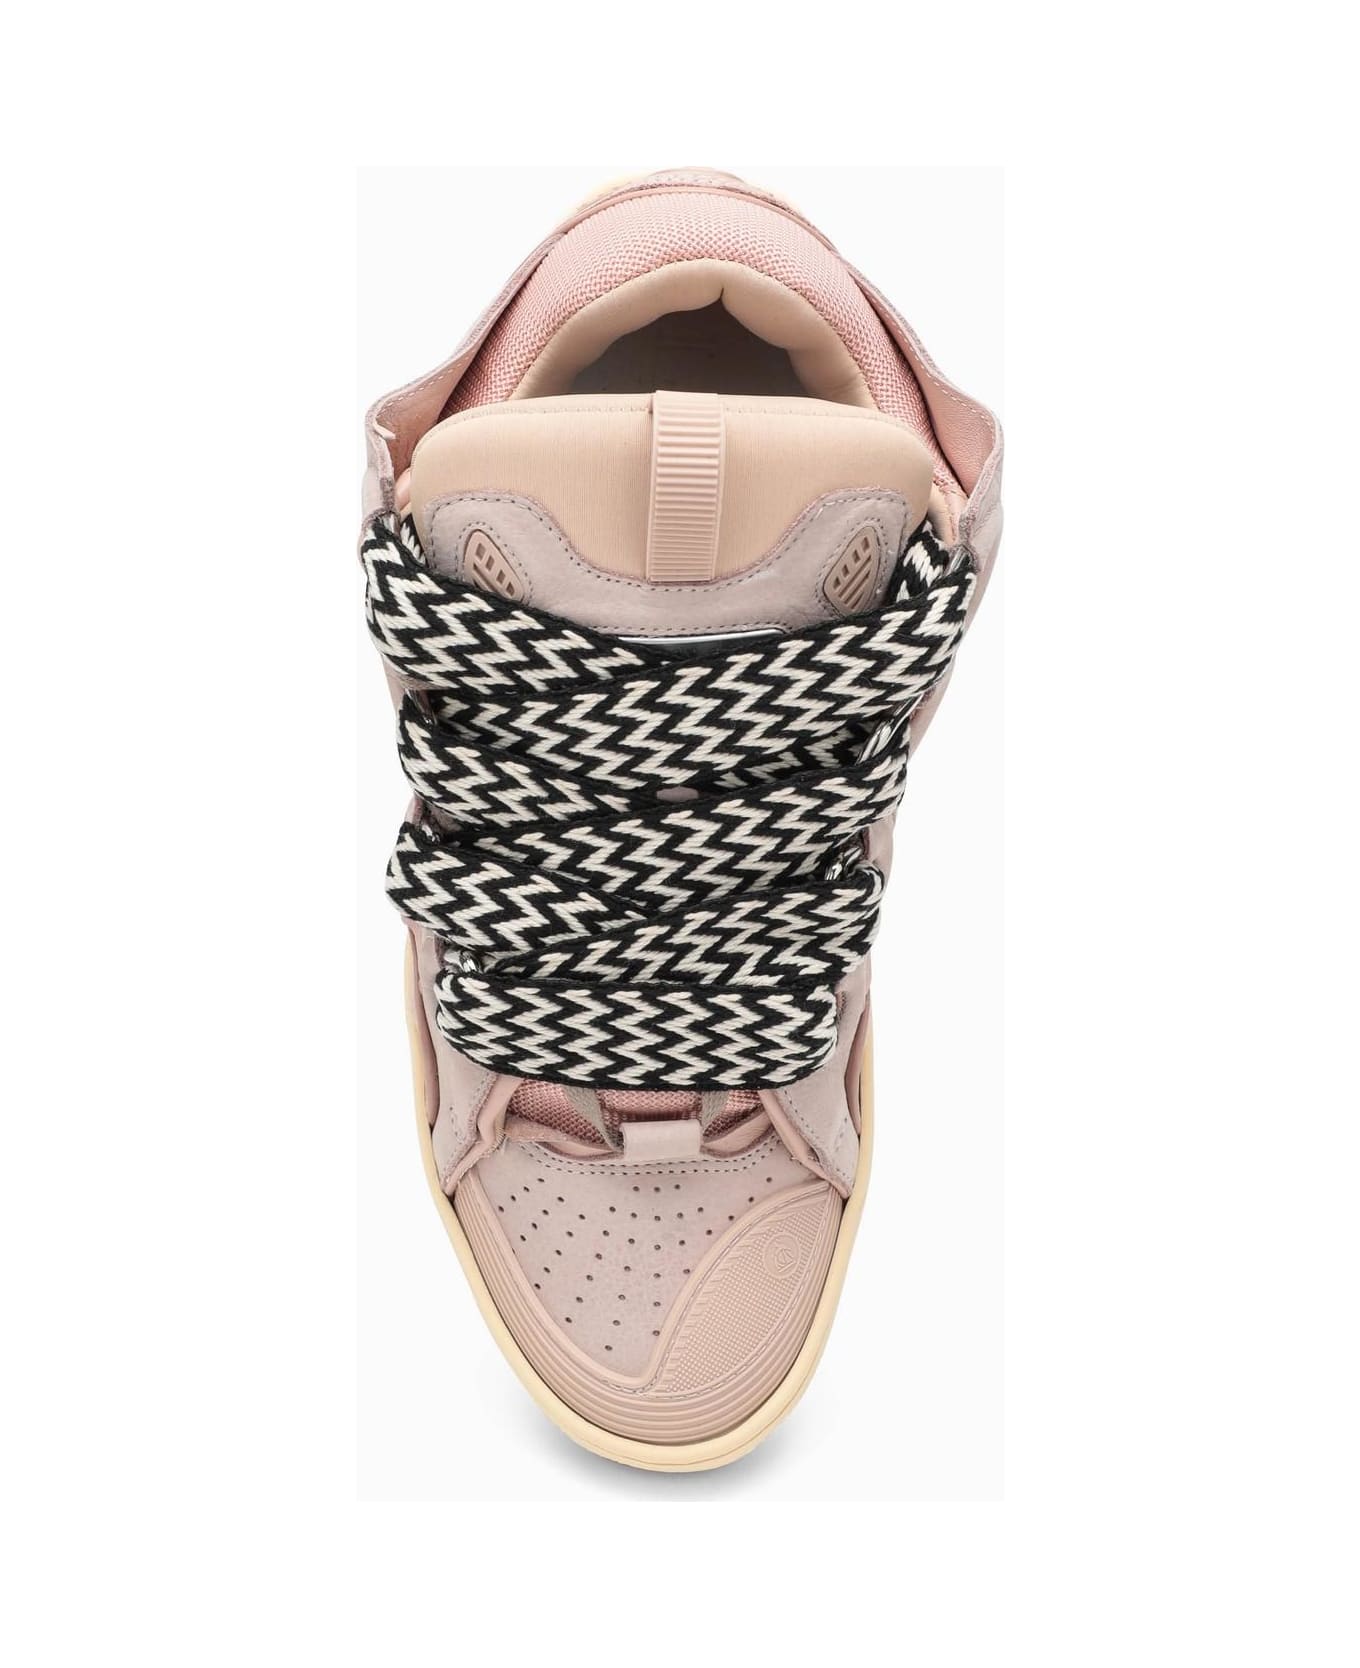 Lanvin Pink Leather Curb Sneakers - Pink